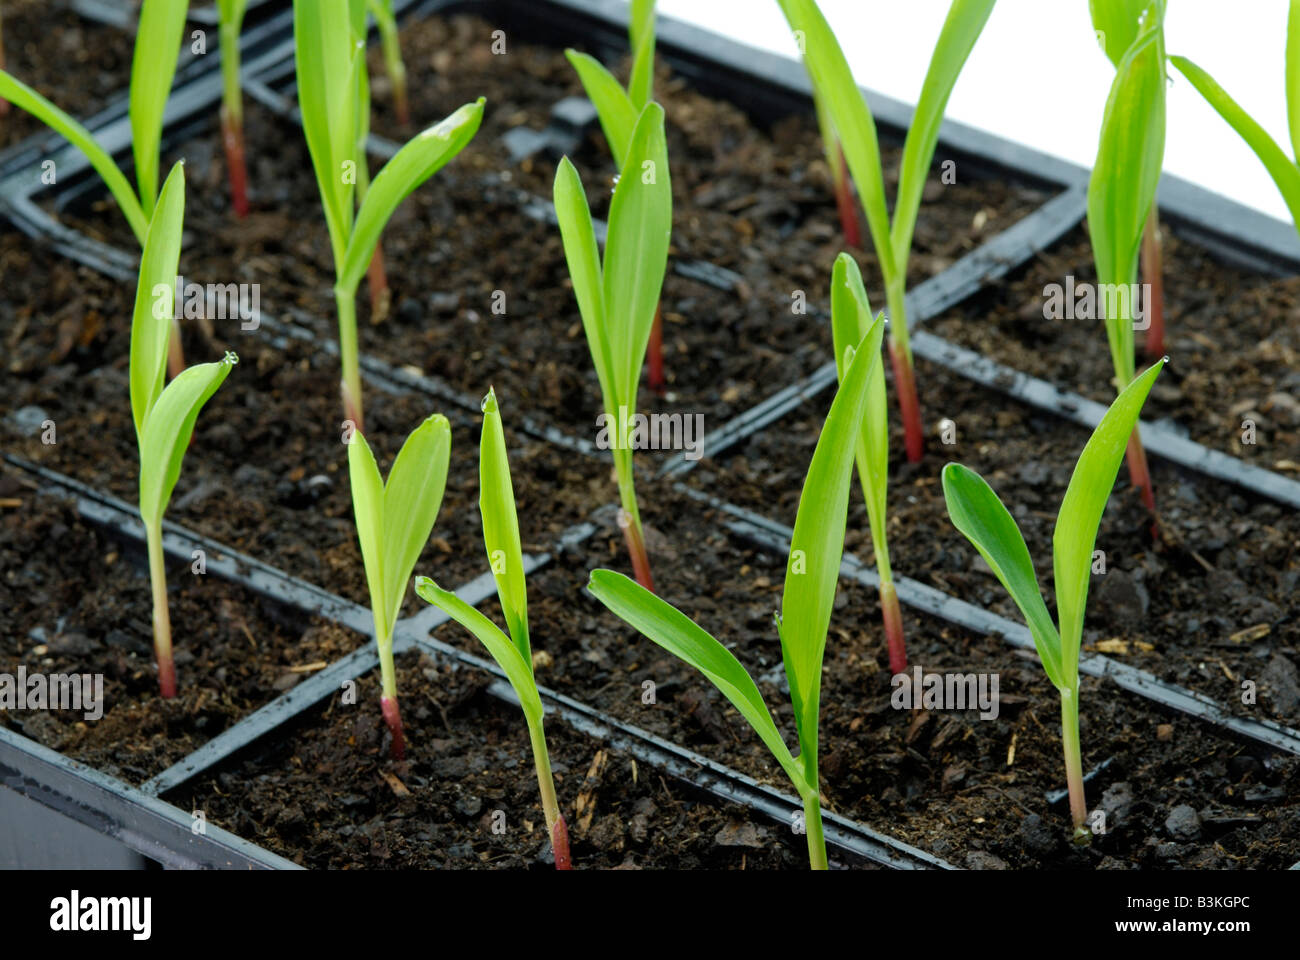 Corn Zea mays seedlings in flats The plants are 1-2 weeks old Stock Photo